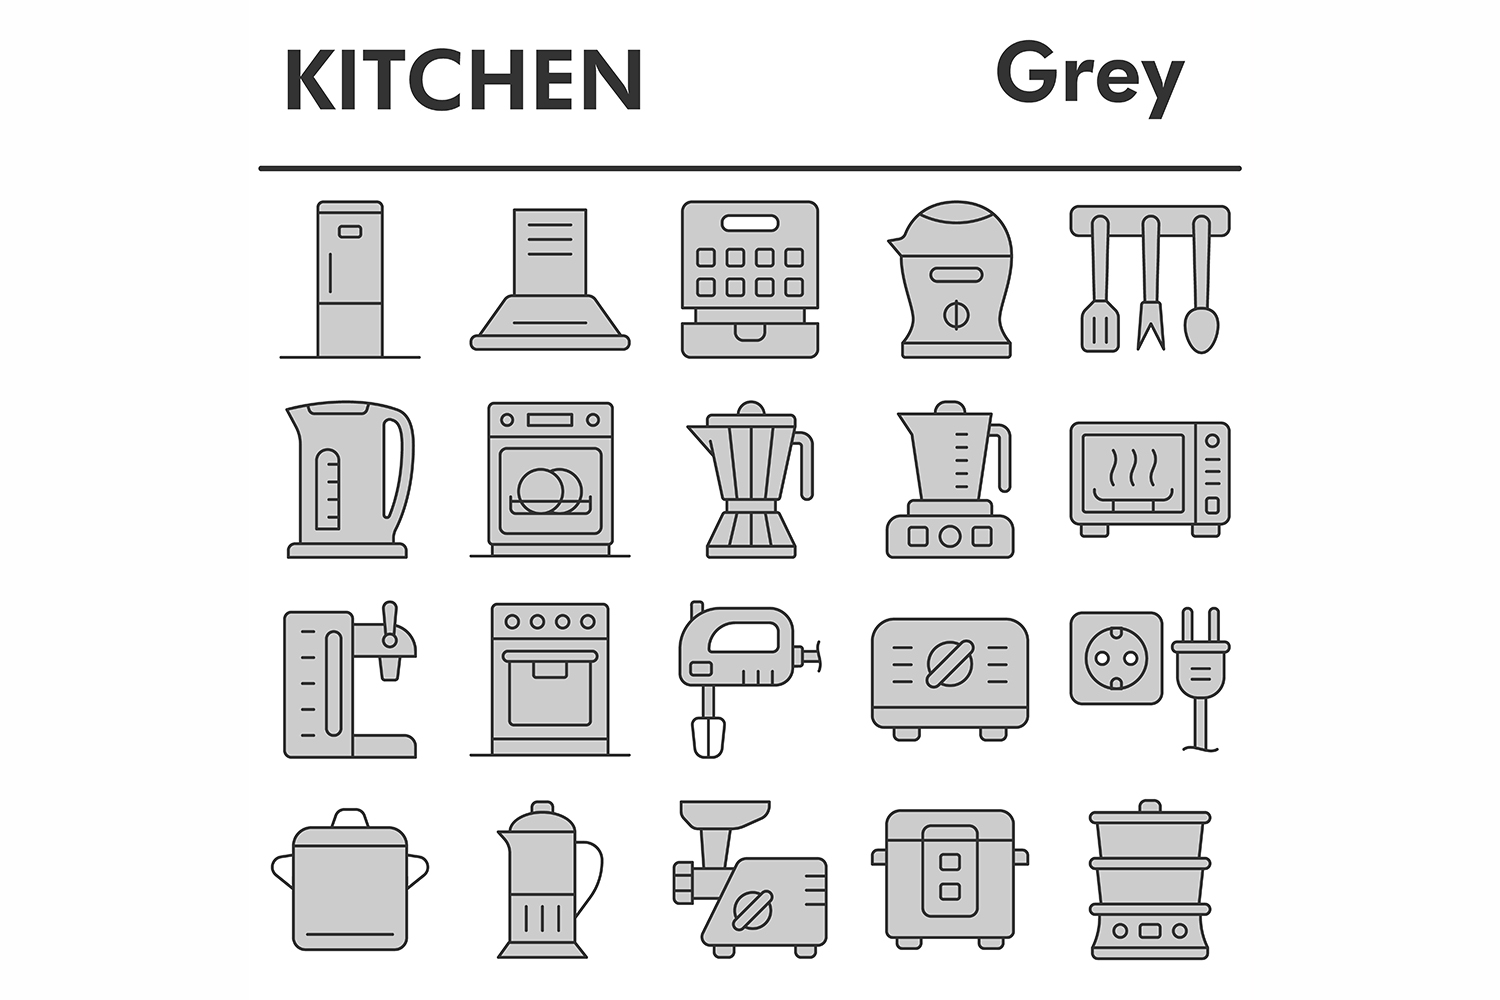 Kitchen icons set, gray style pinterest preview image.